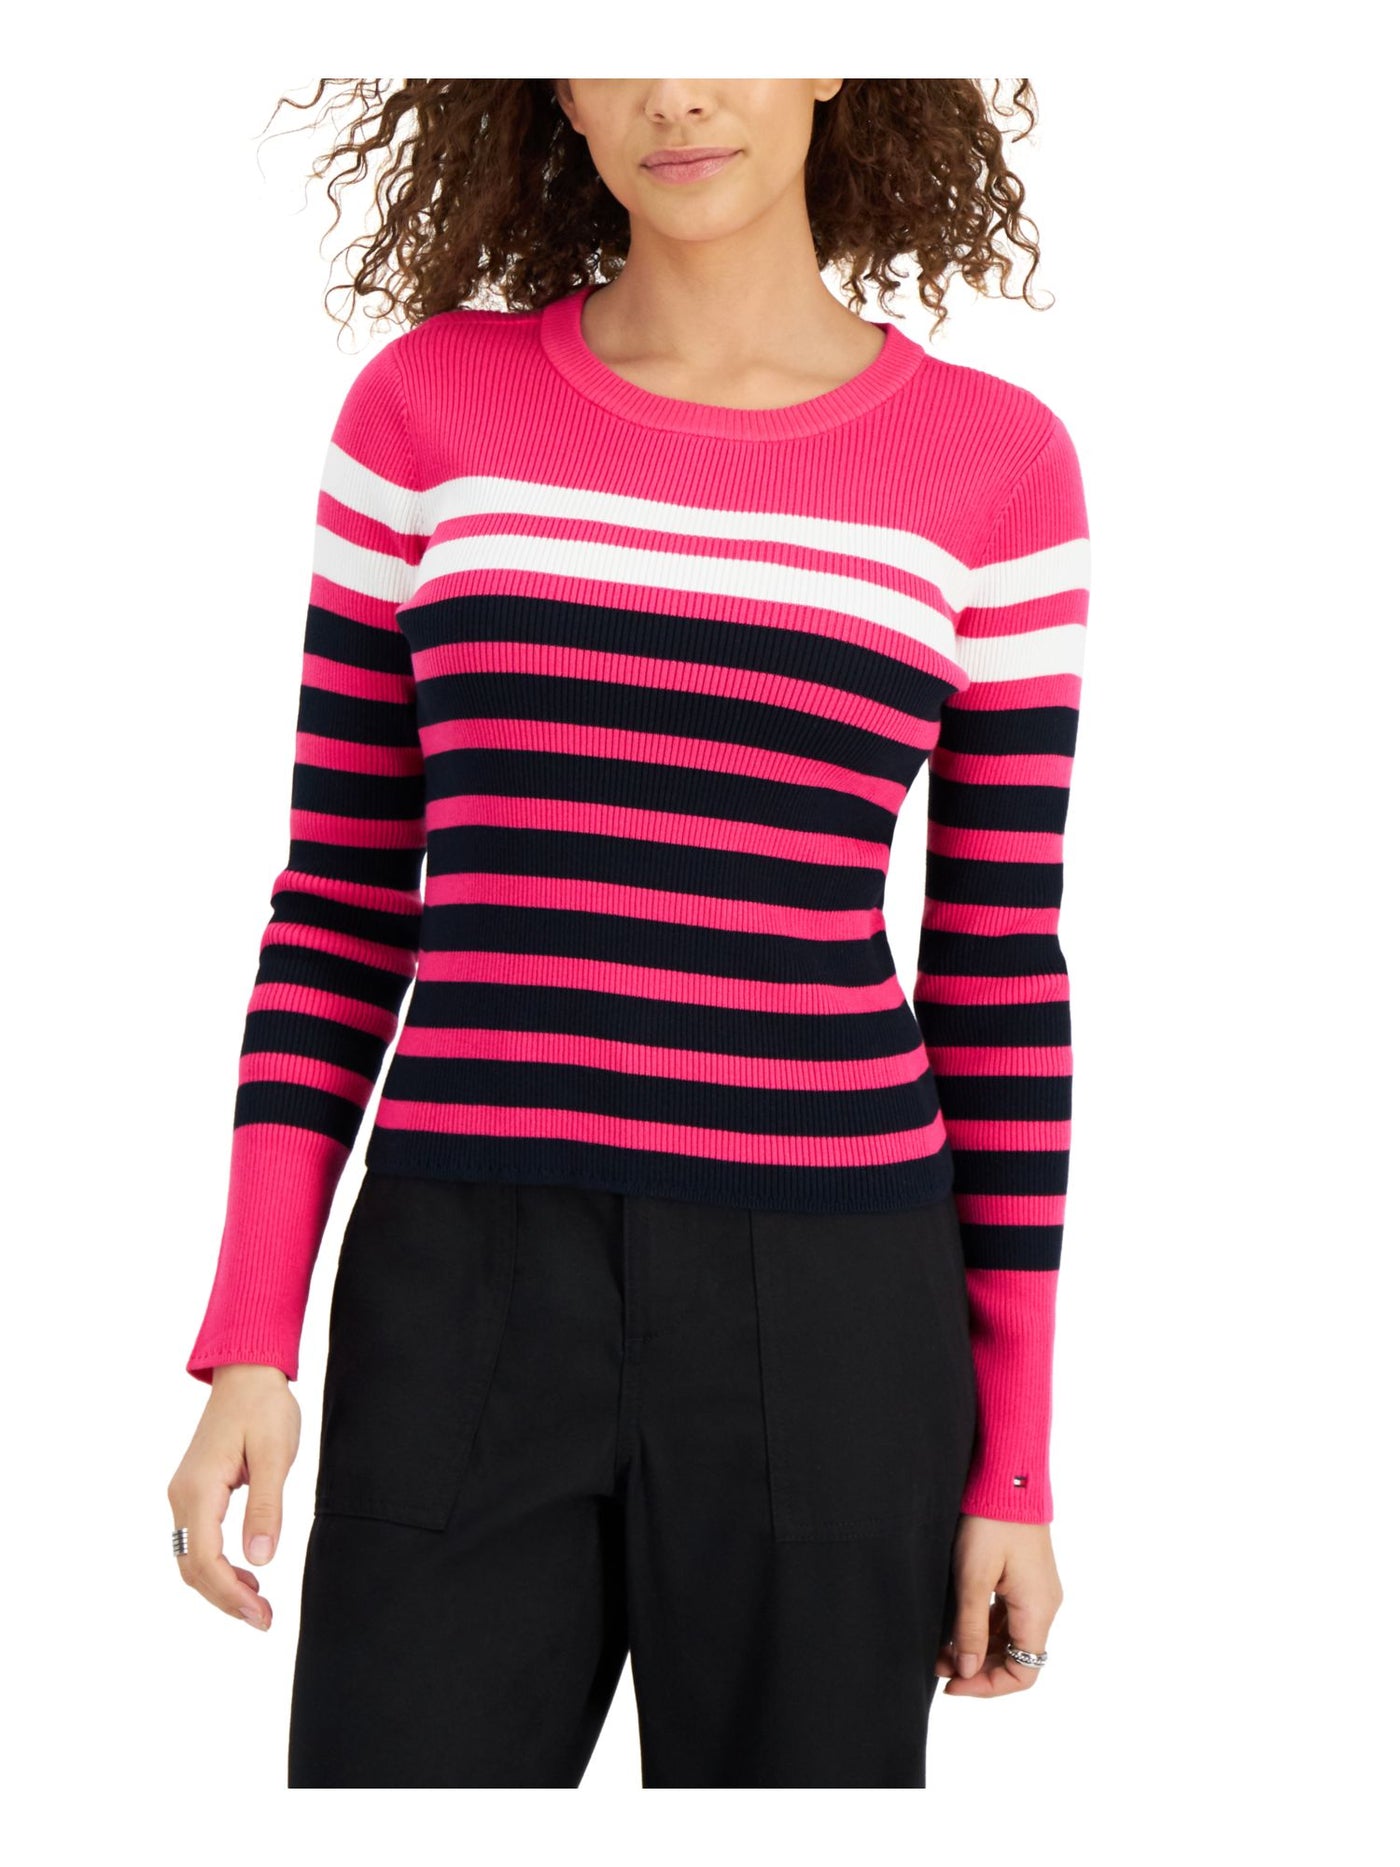 TOMMY HILFIGER Womens Pink Ribbed Pullover Striped Long Sleeve Round Neck Sweater XXL